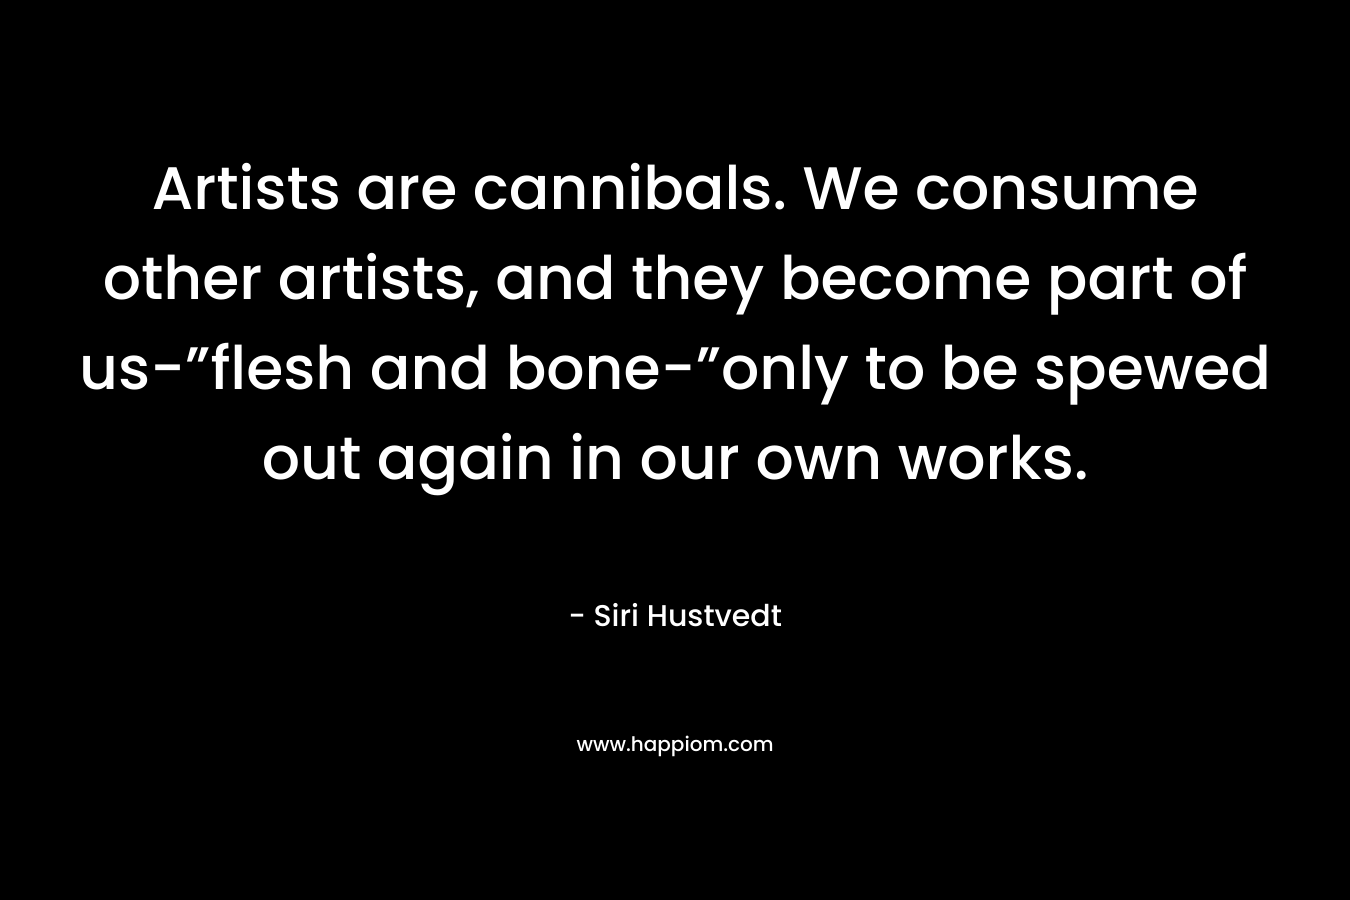 Artists are cannibals. We consume other artists, and they become part of us-”flesh and bone-”only to be spewed out again in our own works. – Siri Hustvedt